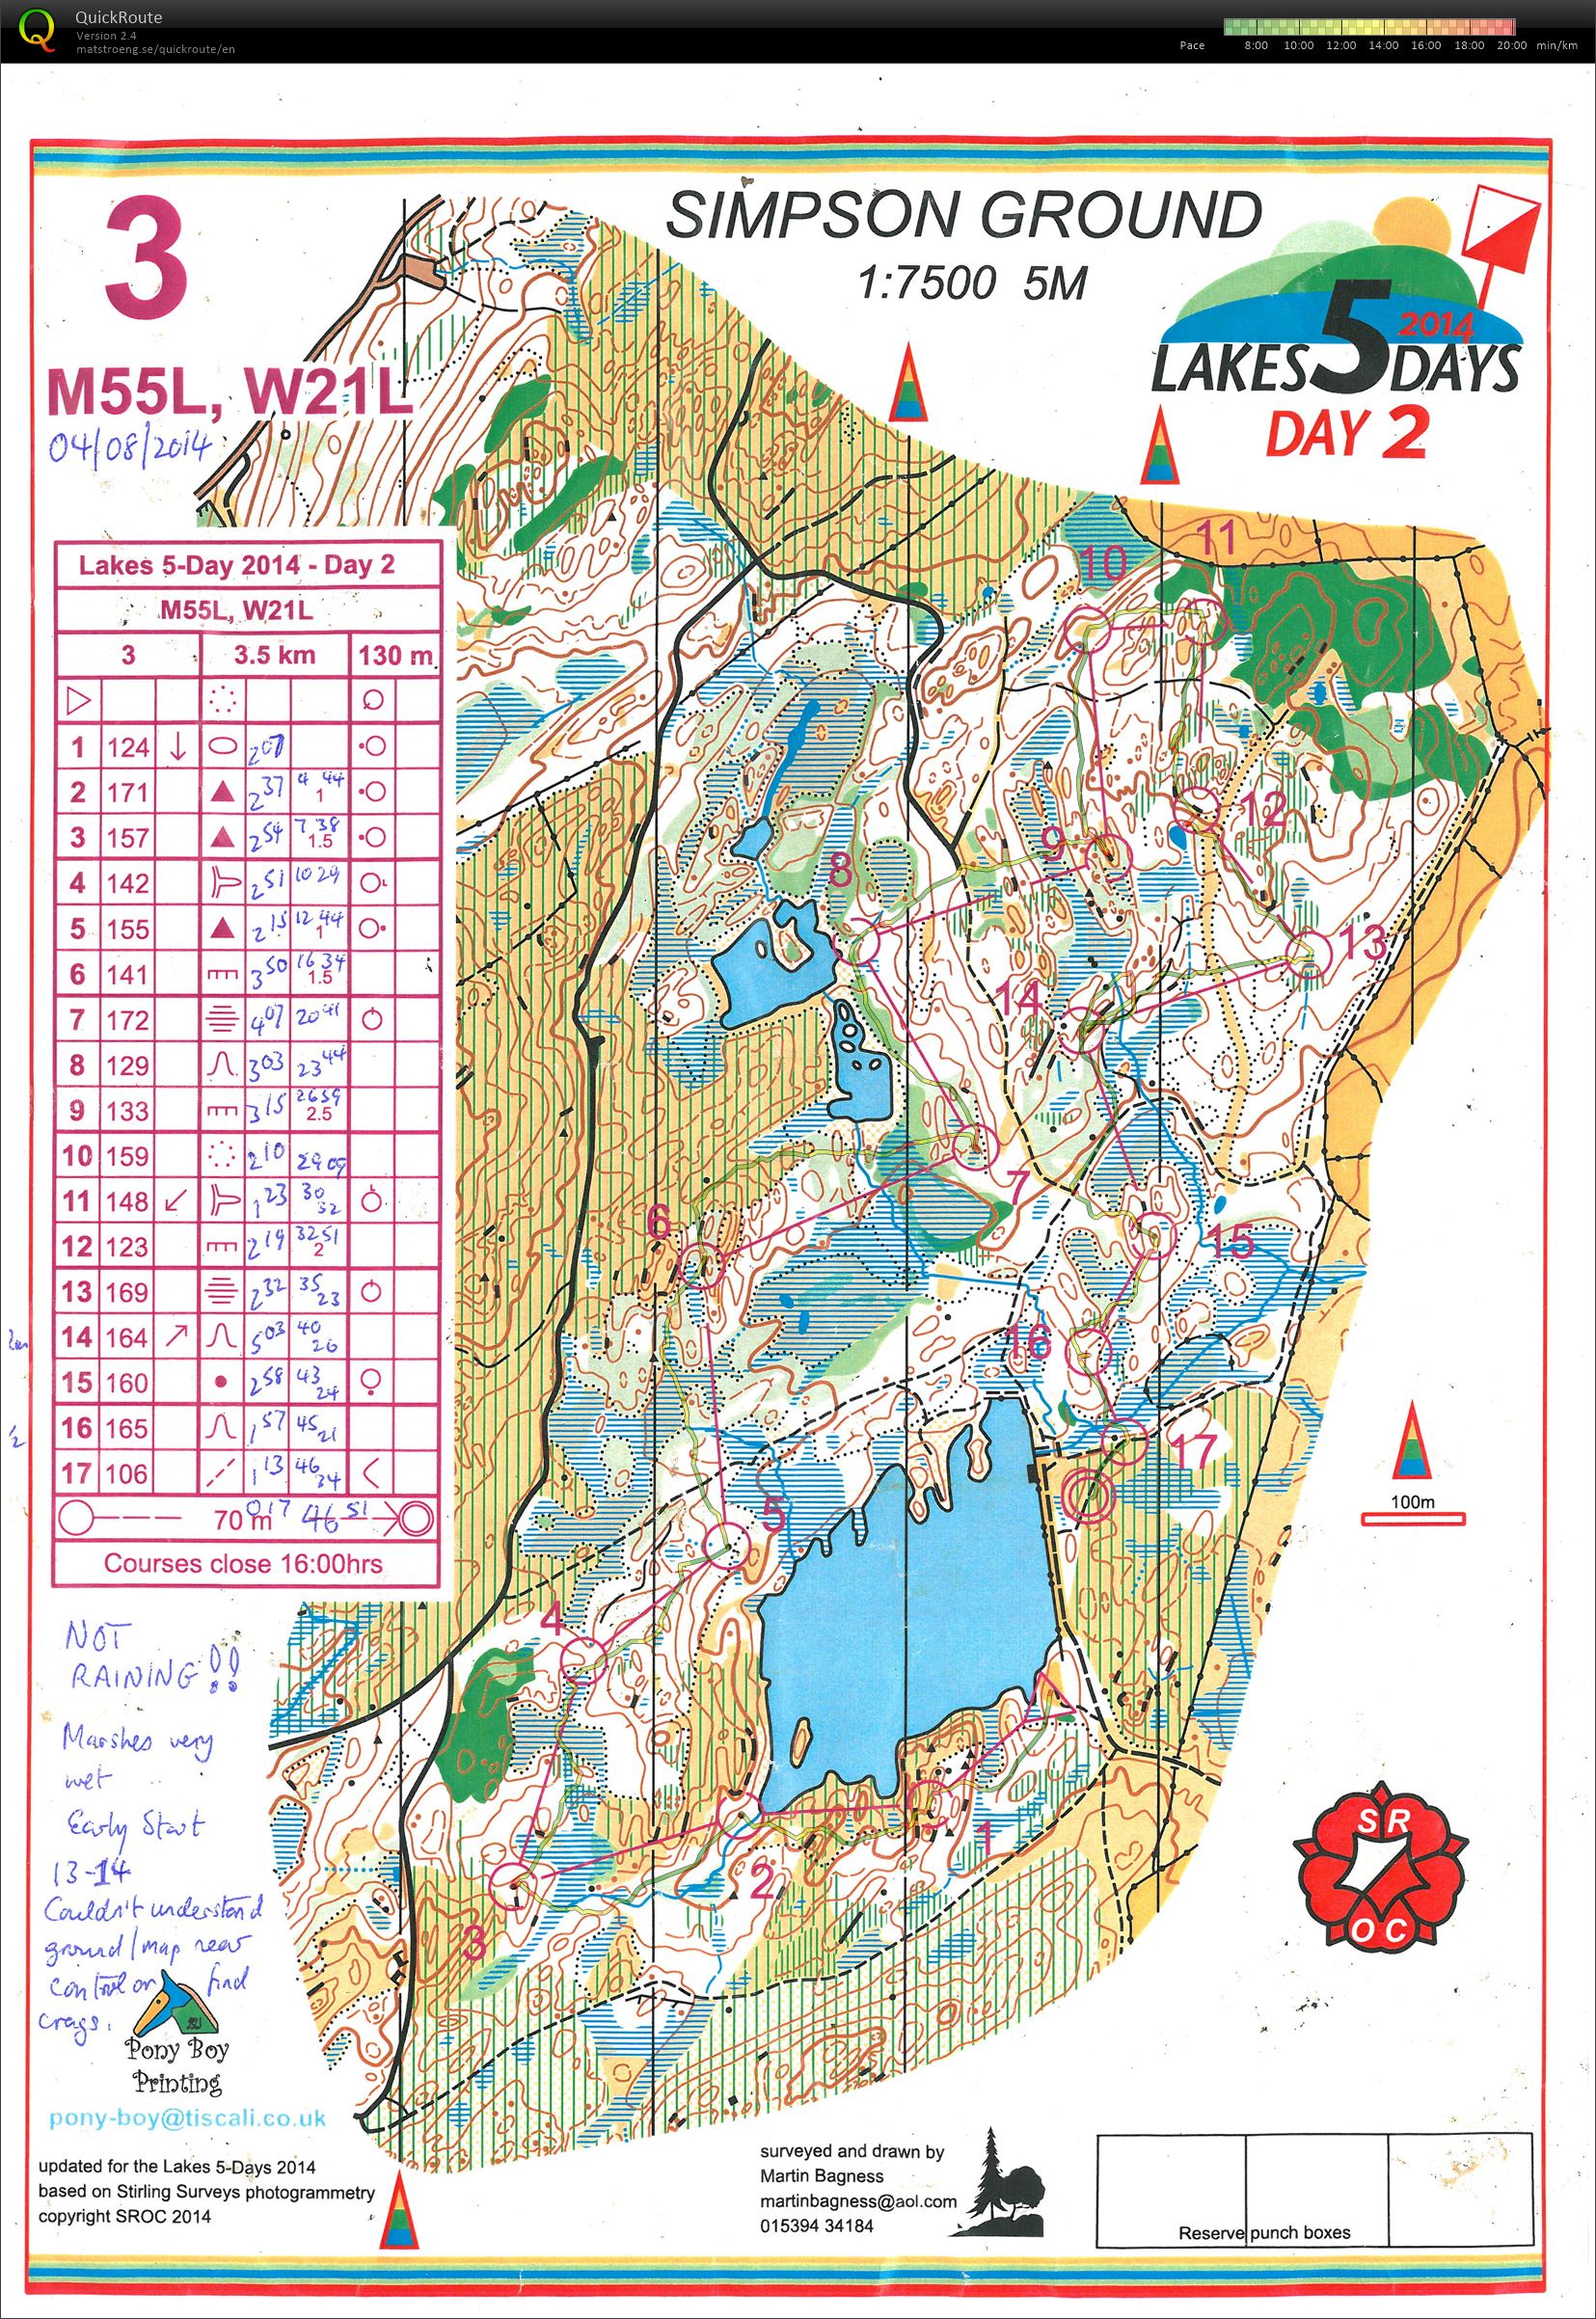 Lakes 5 days - Day 2 H55 (04.08.2014)